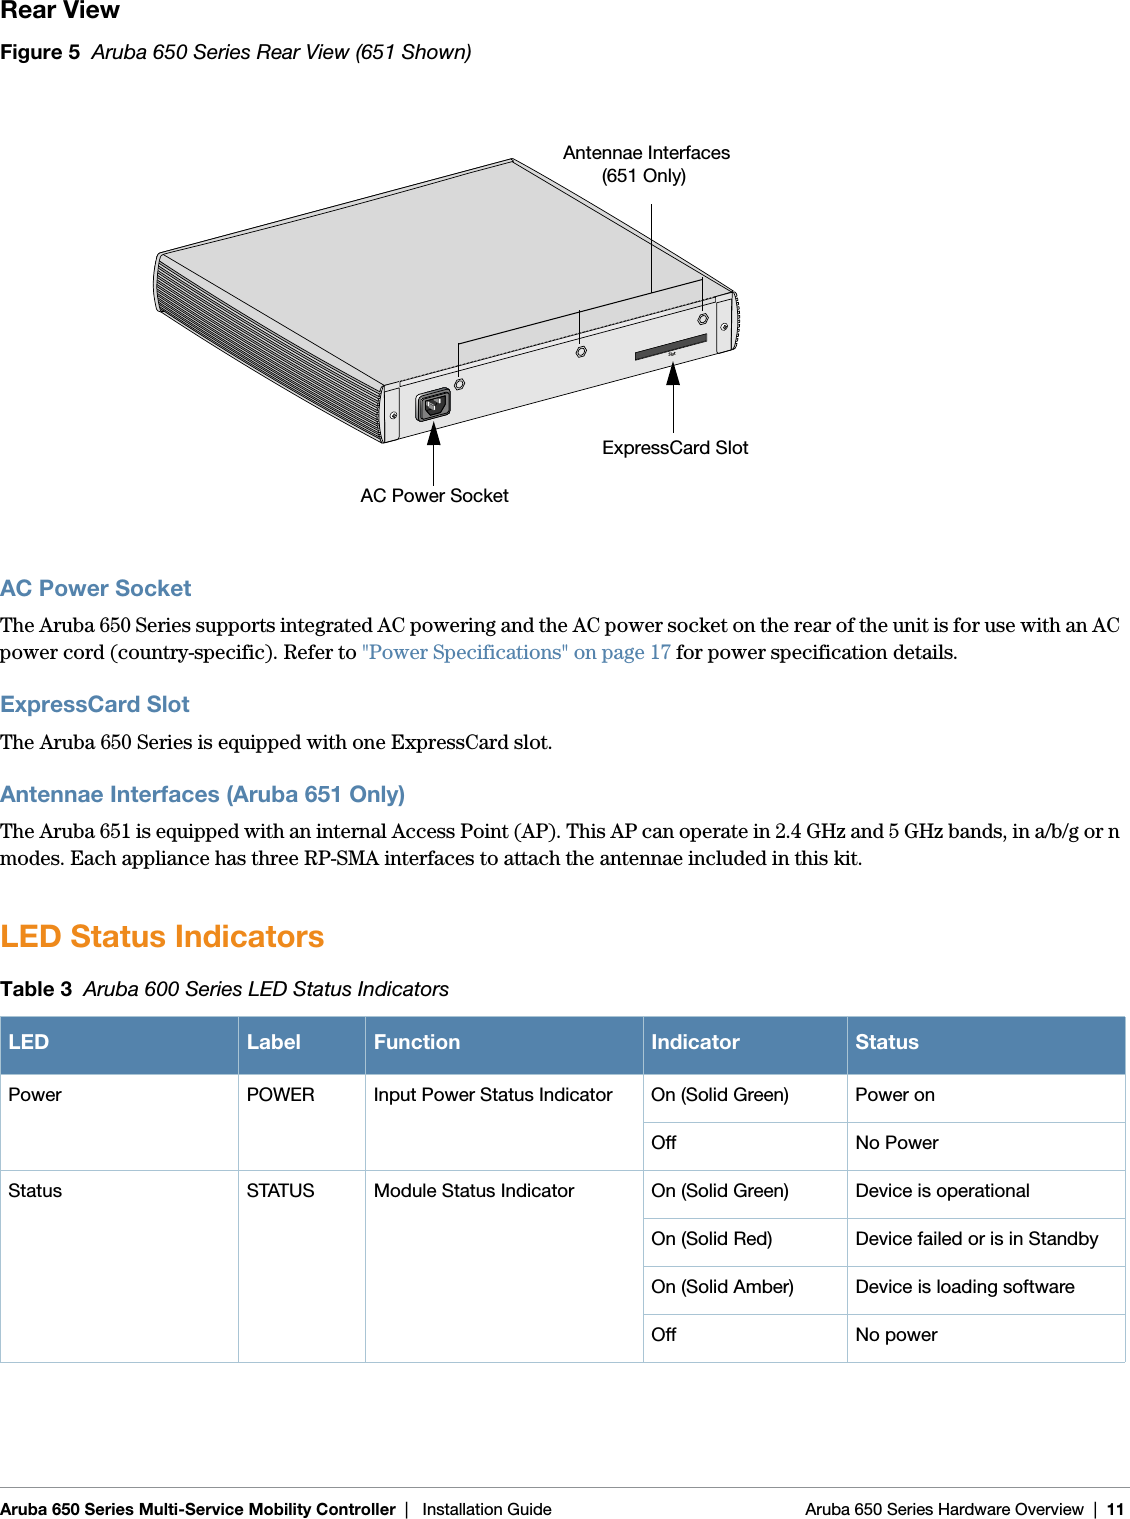 Aruba 650 Series Multi-Service Mobility Controller | Installation Guide Aruba 650 Series Hardware Overview | 11Rear ViewFigure 5  Aruba 650 Series Rear View (651 Shown)AC Power SocketThe Aruba 650 Series supports integrated AC powering and the AC power socket on the rear of the unit is for use with an AC power cord (country-specific). Refer to &quot;Power Specifications&quot; on page17 for power specification details.ExpressCard SlotThe Aruba 650 Series is equipped with one ExpressCard slot.Antennae Interfaces (Aruba 651 Only)The Aruba 651 is equipped with an internal Access Point (AP). This AP can operate in 2.4 GHz and 5 GHz bands, in a/b/g or n modes. Each appliance has three RP-SMA interfaces to attach the antennae included in this kit.LED Status IndicatorsTable 3  Aruba 600 Series LED Status IndicatorsLED Label Function Indicator StatusPower POWER Input Power Status Indicator On (Solid Green) Power onOff No PowerStatus STATUS Module Status Indicator On (Solid Green) Device is operationalOn (Solid Red)  Device failed or is in StandbyOn (Solid Amber) Device is loading softwareOff No powerSlotAC Power SocketExpressCard SlotAntennae Interfaces (651 Only)